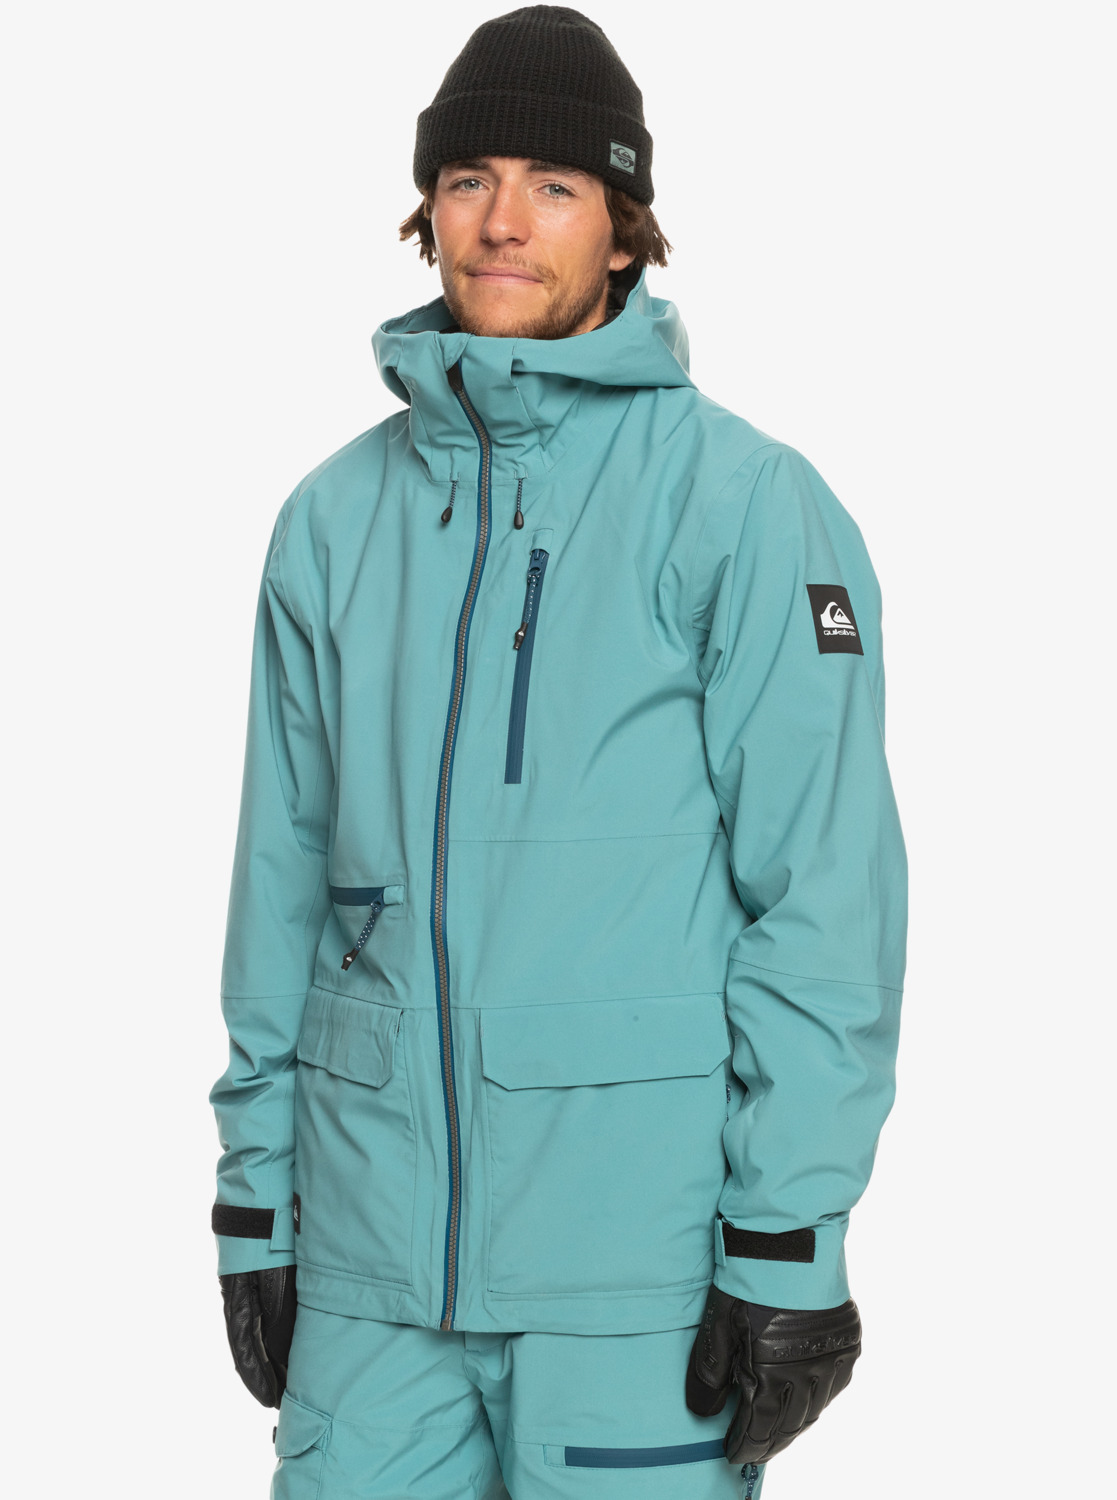 Quiksilver Carlson Stretch Quest jacket brittany blue